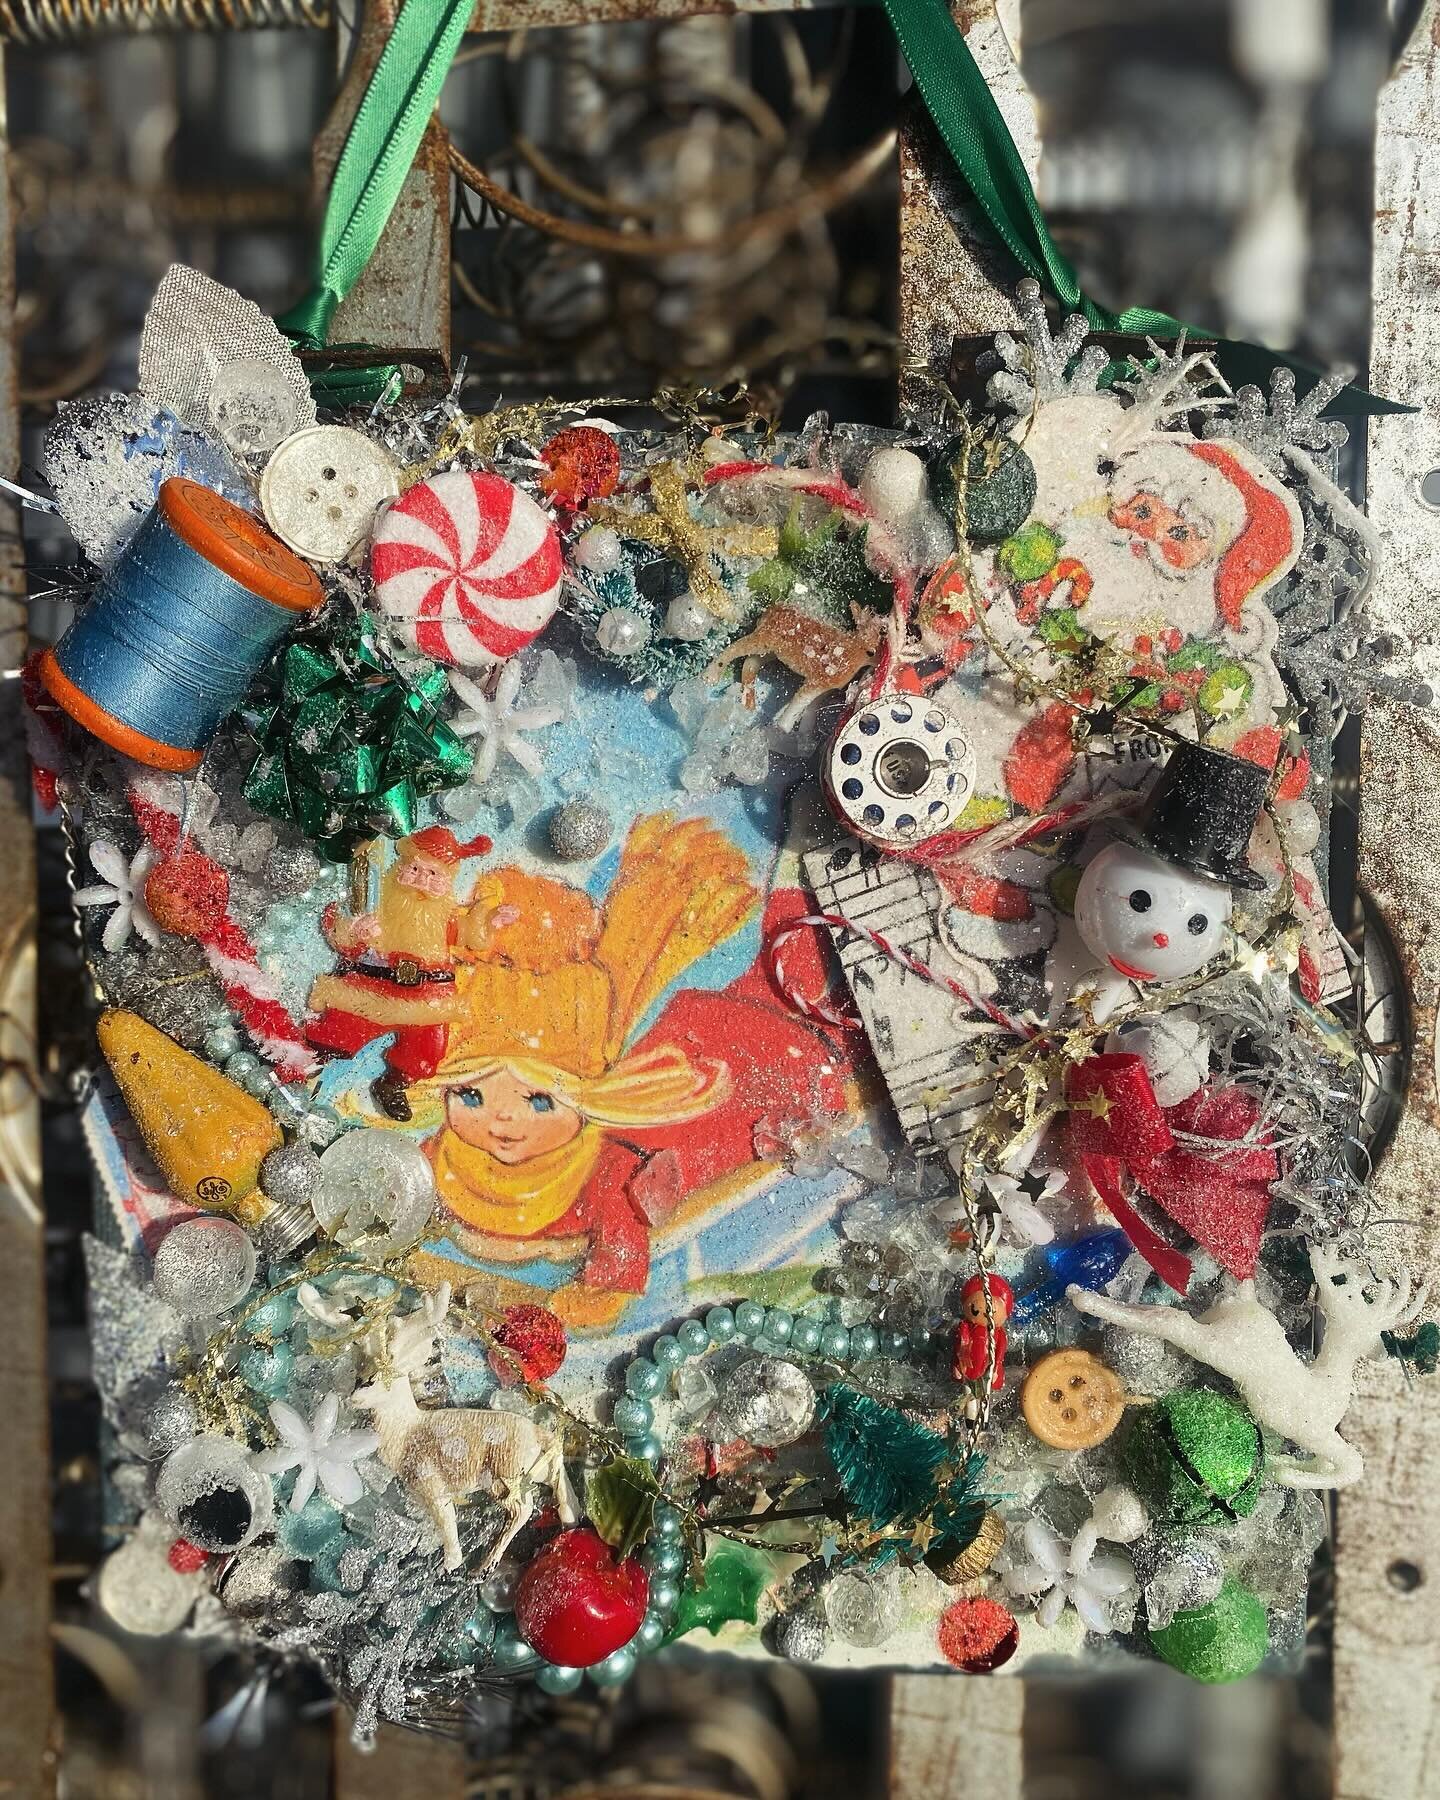 The result of watching a junk journal ASMR &hellip;..

Upcycled vintage wood panel with vintage children&rsquo;s book decoupage &amp; all sorts of kitschy knick knacks + hanging tin assemblage with even more sparkly bits &amp; bobs new in Booth 56 at